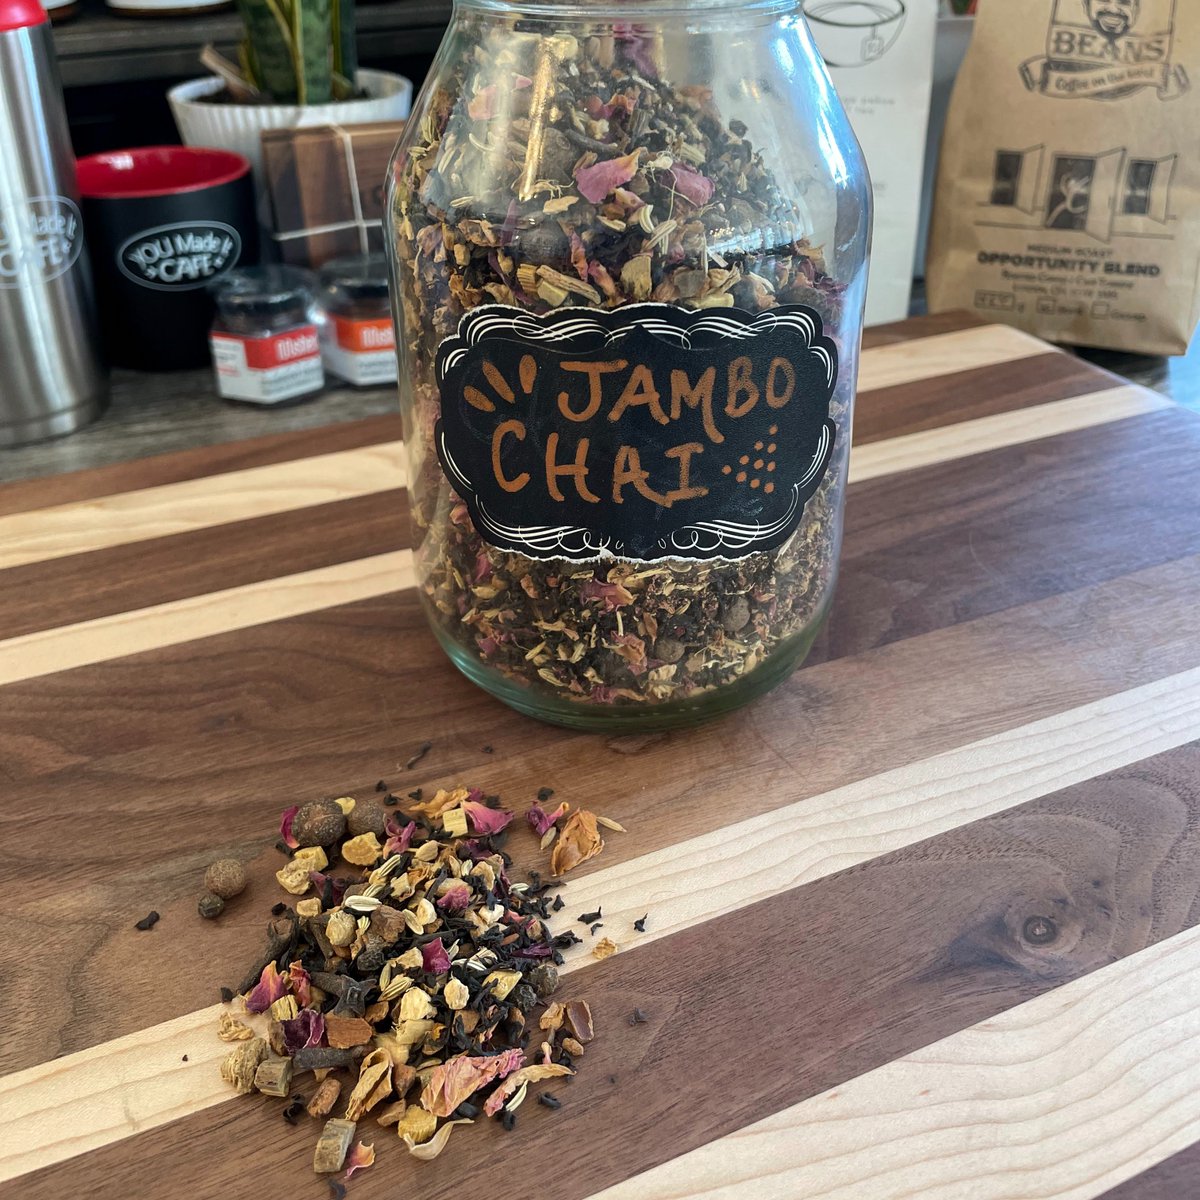 We carry a fantastic selection of loose-leaf teas from @beTeasInc 🫖 Warm up with a cup or get a full teapot to share with a friend in our sunny café. 

Our full menu: bit.ly/3OXU0rS

#youthtraining #socent #ldnont #beteas #socialgoodcafe